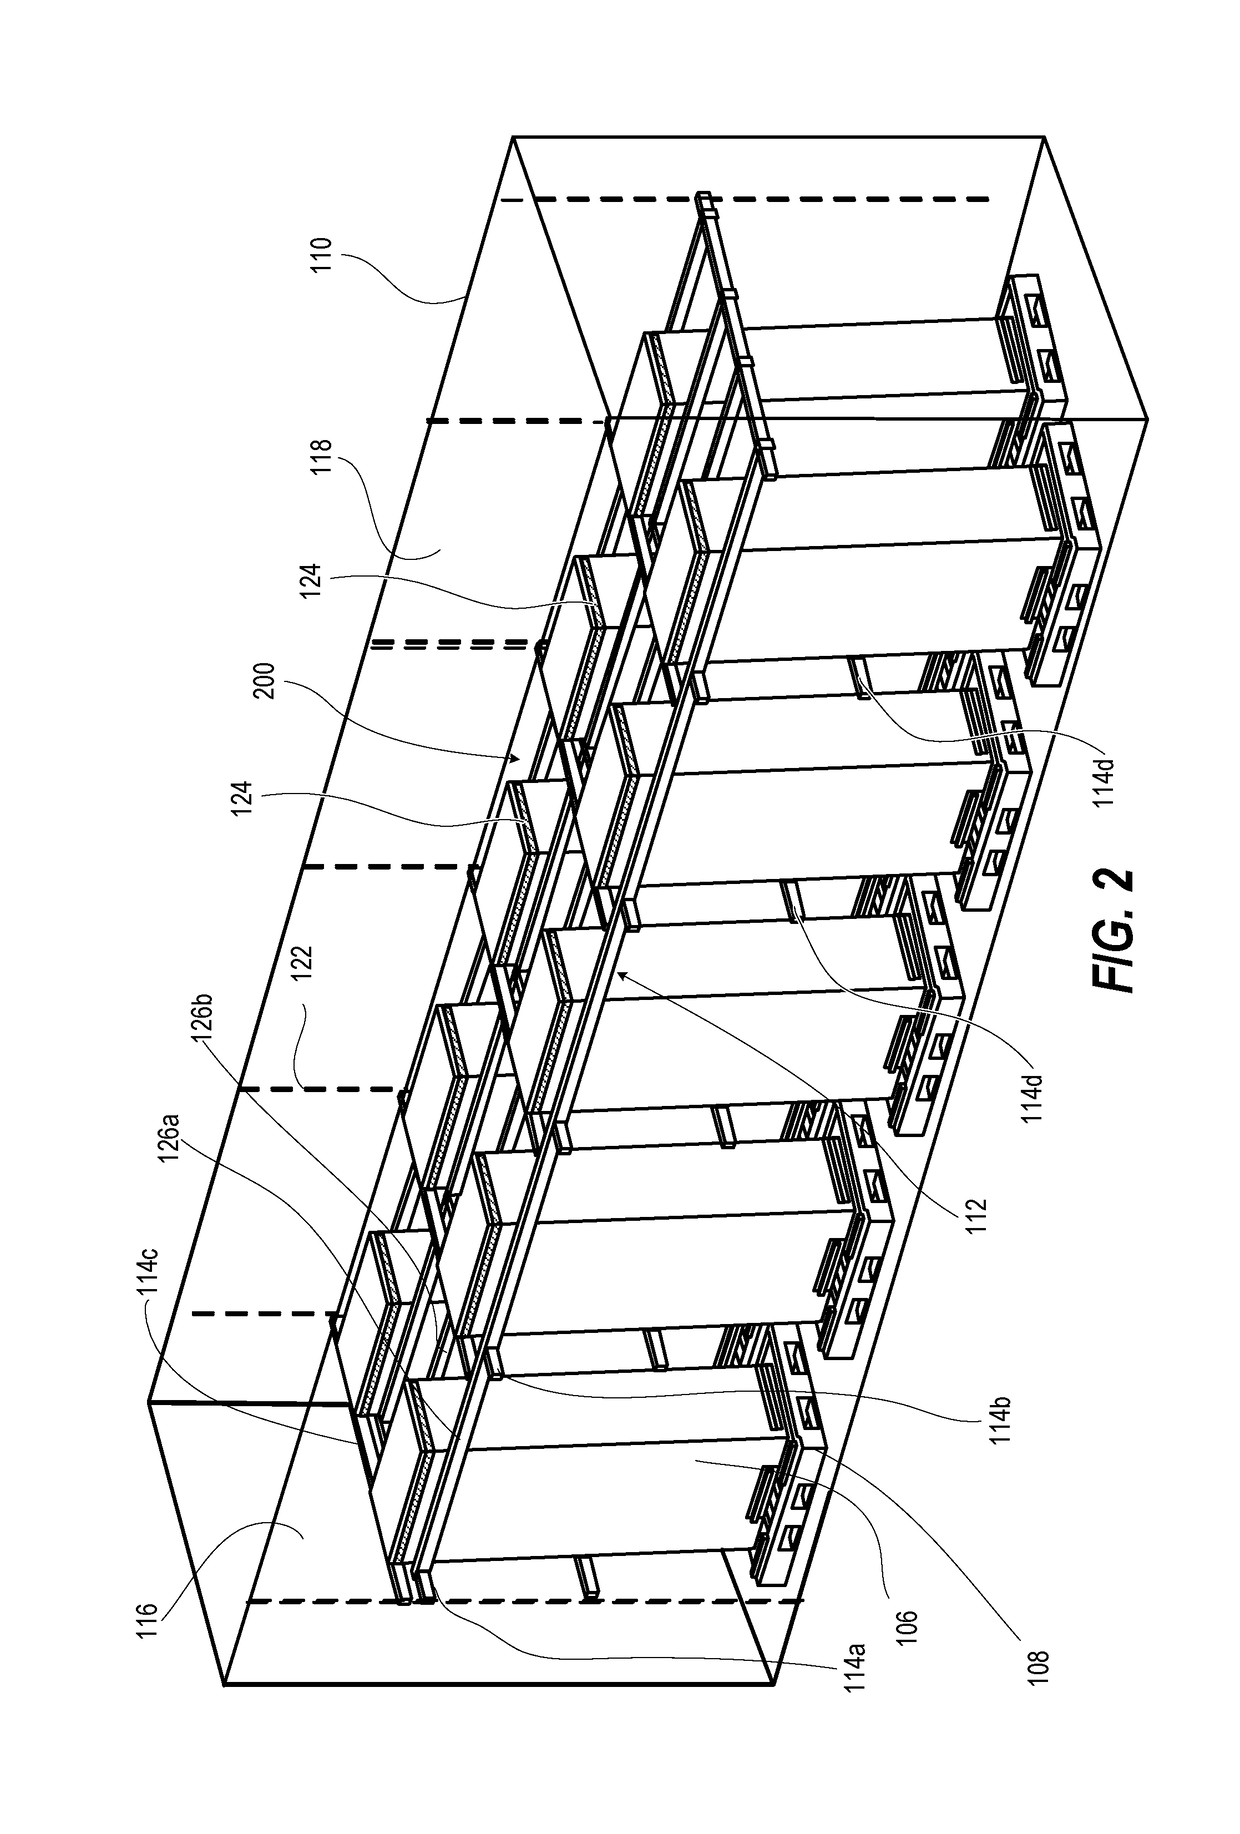 Structure and method for securing and transporting equipment racks